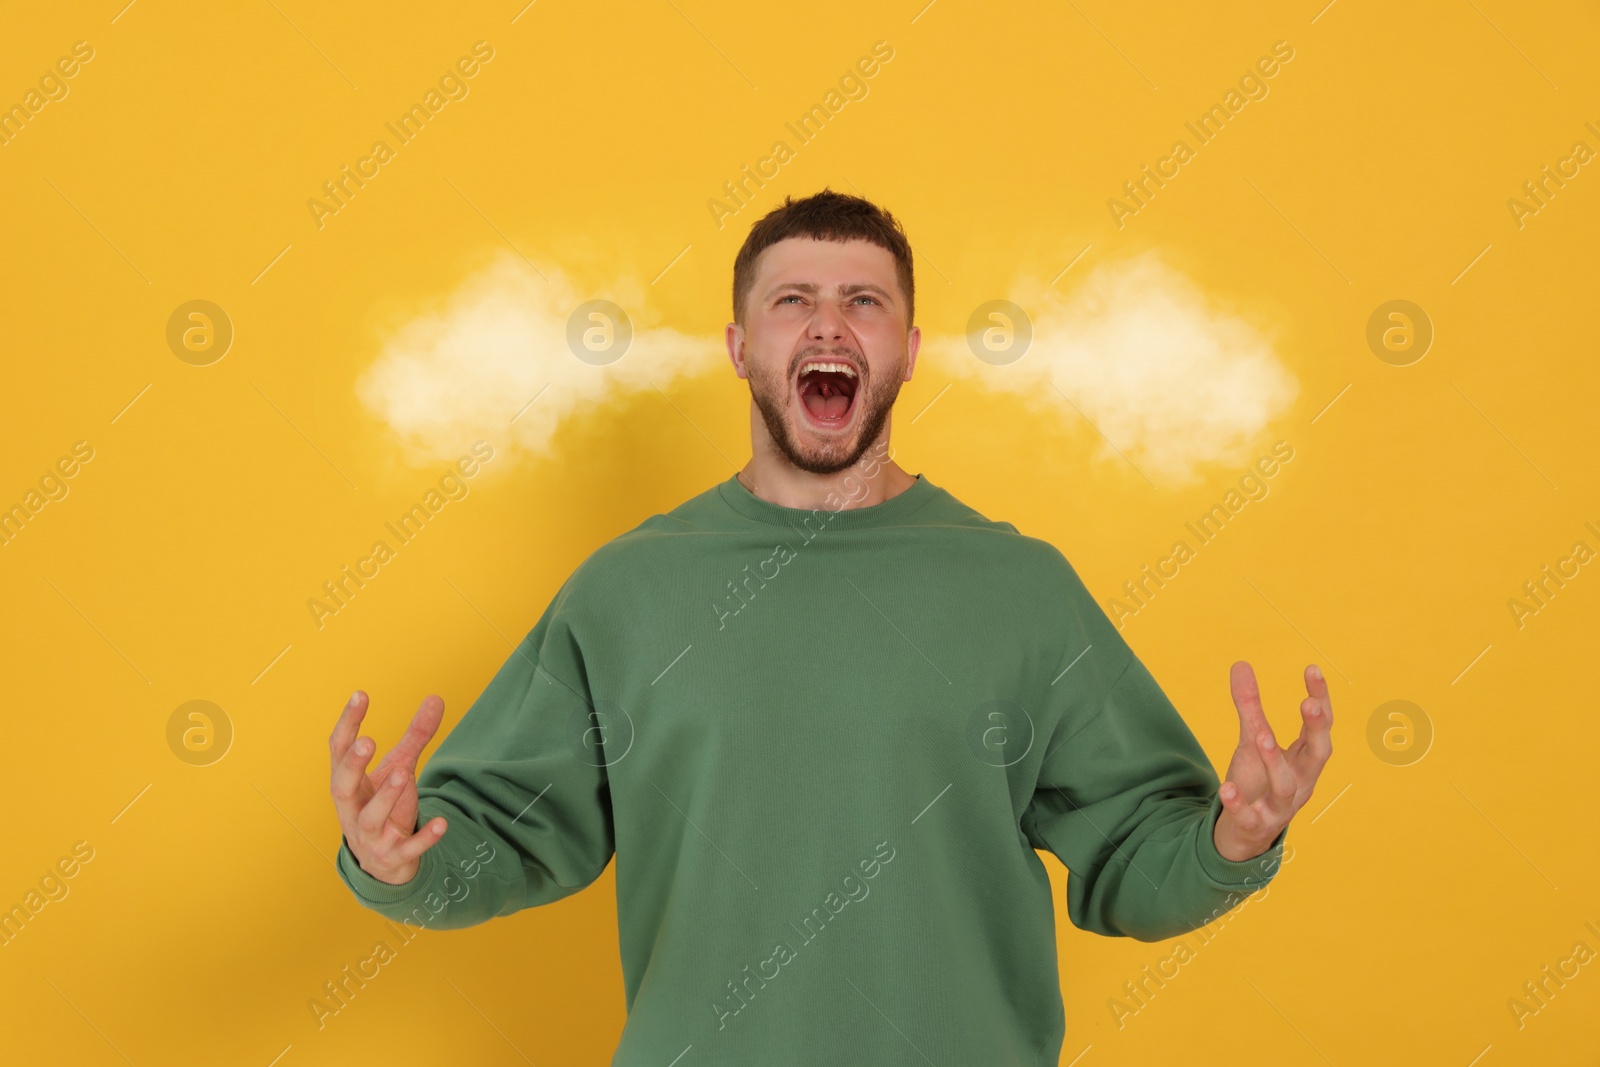 Image of Aggressive man with steam coming out of his ears on yellow background